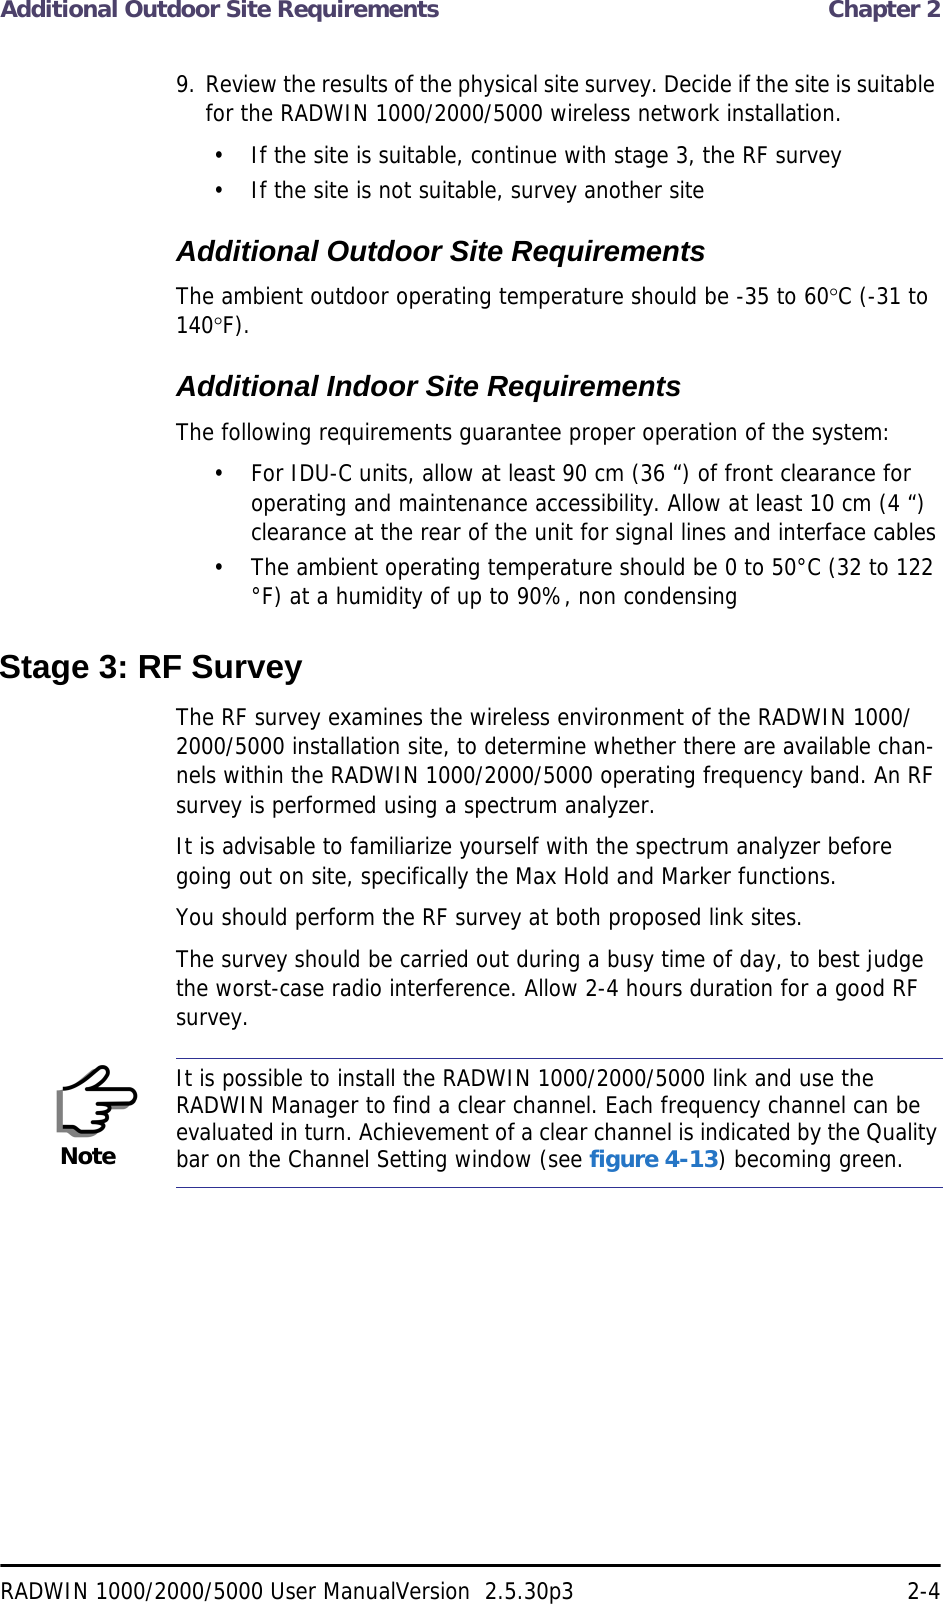 Additional Outdoor Site Requirements  Chapter 2RADWIN 1000/2000/5000 User ManualVersion  2.5.30p3 2-49. Review the results of the physical site survey. Decide if the site is suitable for the RADWIN 1000/2000/5000 wireless network installation.• If the site is suitable, continue with stage 3, the RF survey• If the site is not suitable, survey another siteAdditional Outdoor Site RequirementsThe ambient outdoor operating temperature should be -35 to 60C (-31 to 140F).Additional Indoor Site RequirementsThe following requirements guarantee proper operation of the system:• For IDU-C units, allow at least 90 cm (36 “) of front clearance for operating and maintenance accessibility. Allow at least 10 cm (4 “) clearance at the rear of the unit for signal lines and interface cables• The ambient operating temperature should be 0 to 50°C (32 to 122 °F) at a humidity of up to 90%, non condensingStage 3: RF SurveyThe RF survey examines the wireless environment of the RADWIN 1000/2000/5000 installation site, to determine whether there are available chan-nels within the RADWIN 1000/2000/5000 operating frequency band. An RF survey is performed using a spectrum analyzer.It is advisable to familiarize yourself with the spectrum analyzer before going out on site, specifically the Max Hold and Marker functions.You should perform the RF survey at both proposed link sites.The survey should be carried out during a busy time of day, to best judge the worst-case radio interference. Allow 2-4 hours duration for a good RF survey.NoteIt is possible to install the RADWIN 1000/2000/5000 link and use the RADWIN Manager to find a clear channel. Each frequency channel can be evaluated in turn. Achievement of a clear channel is indicated by the Quality bar on the Channel Setting window (see figure 4-13) becoming green.